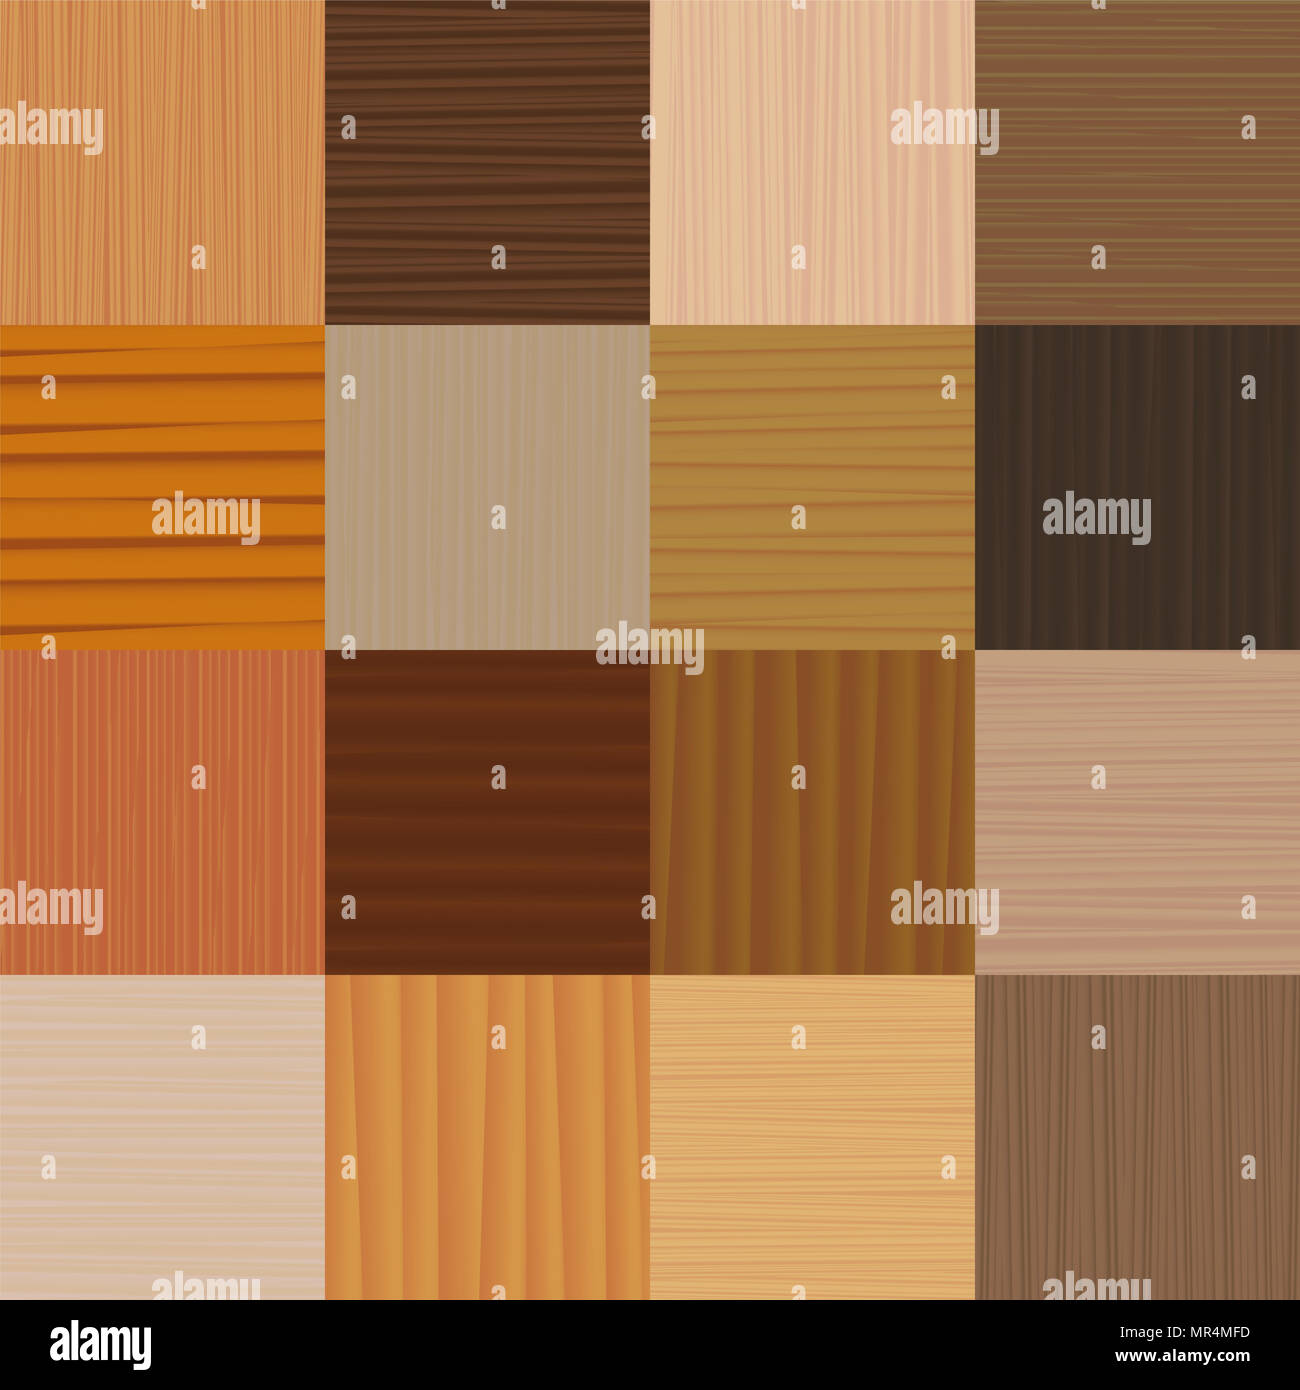 Parquet floor. Different types of wood, glazes, textures, patterns - illustration of flooring samples. Stock Photo